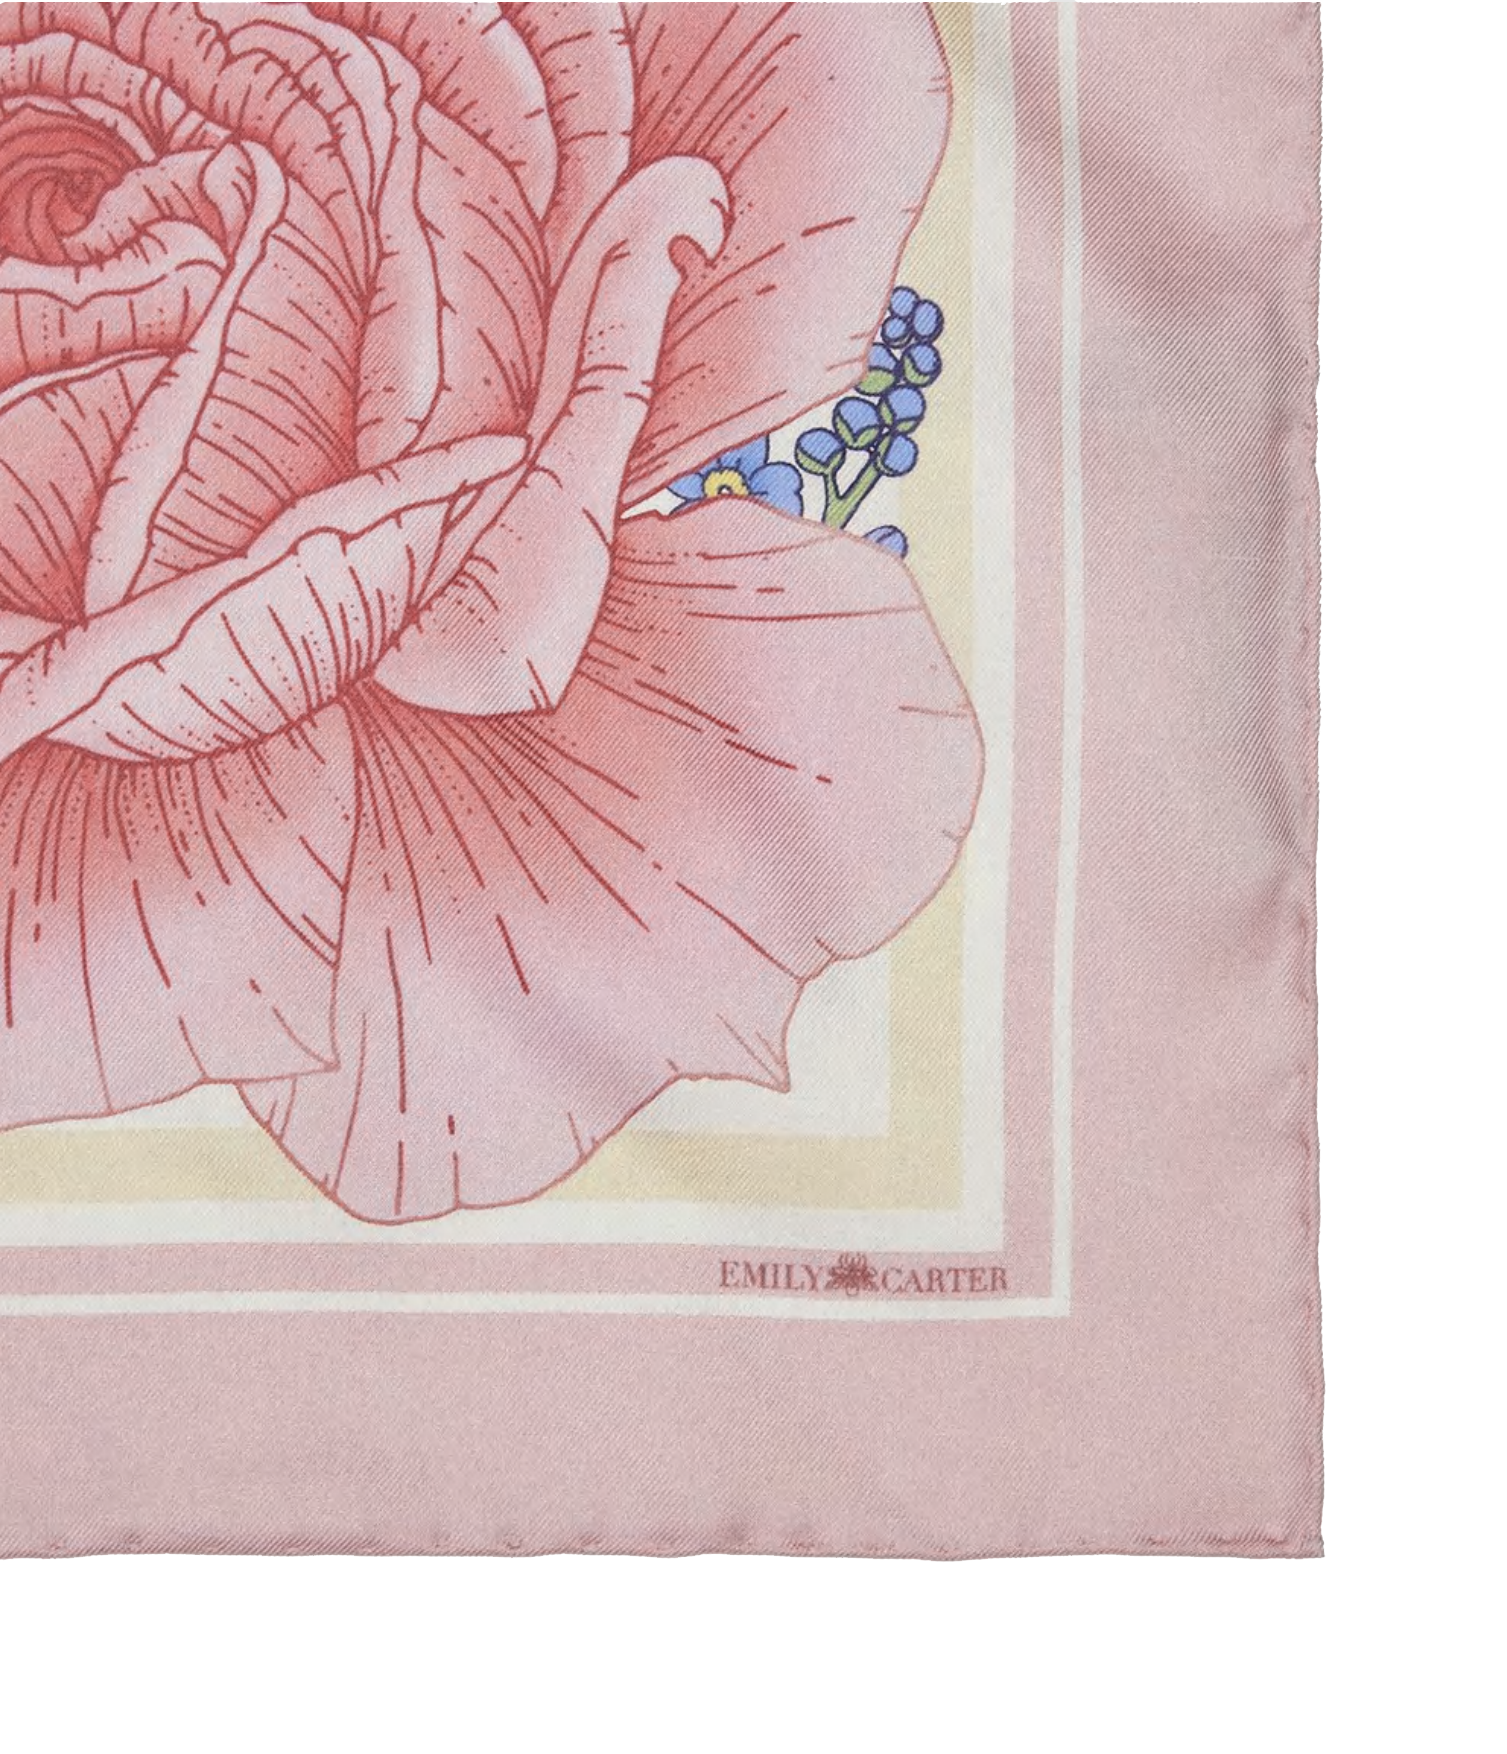 The Rose & Bluebell Silk Scarf | 65x65cm [Preorder]